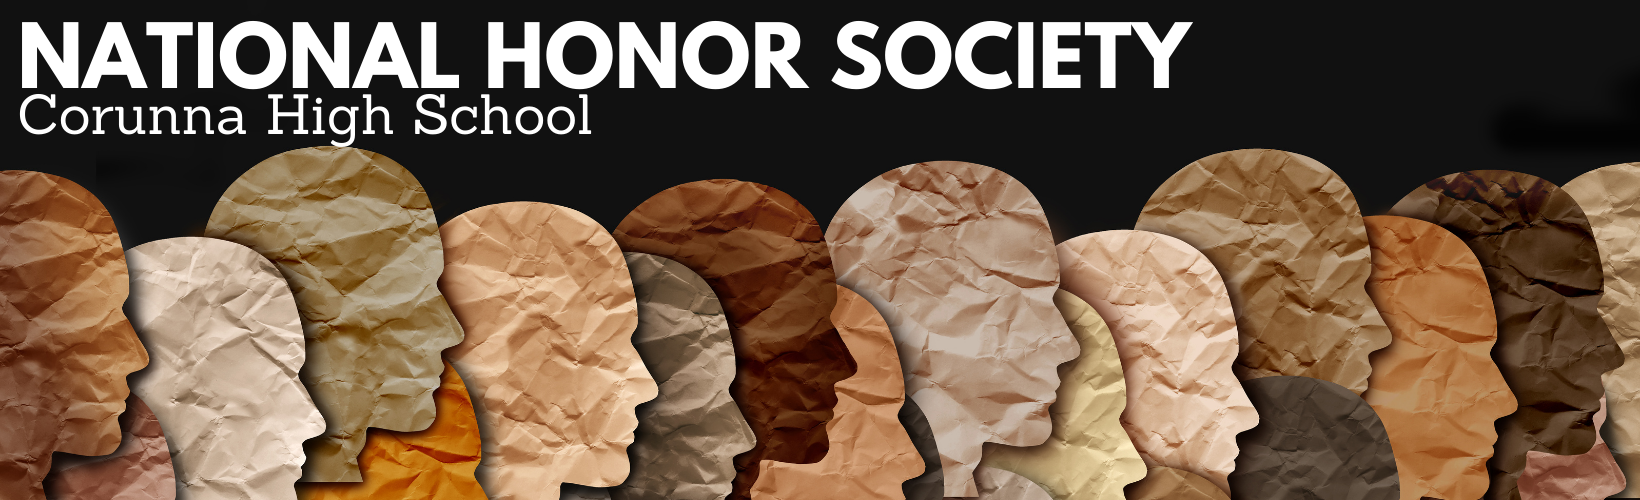 nhs temp Banner Image (paper cutout heads forming a group)